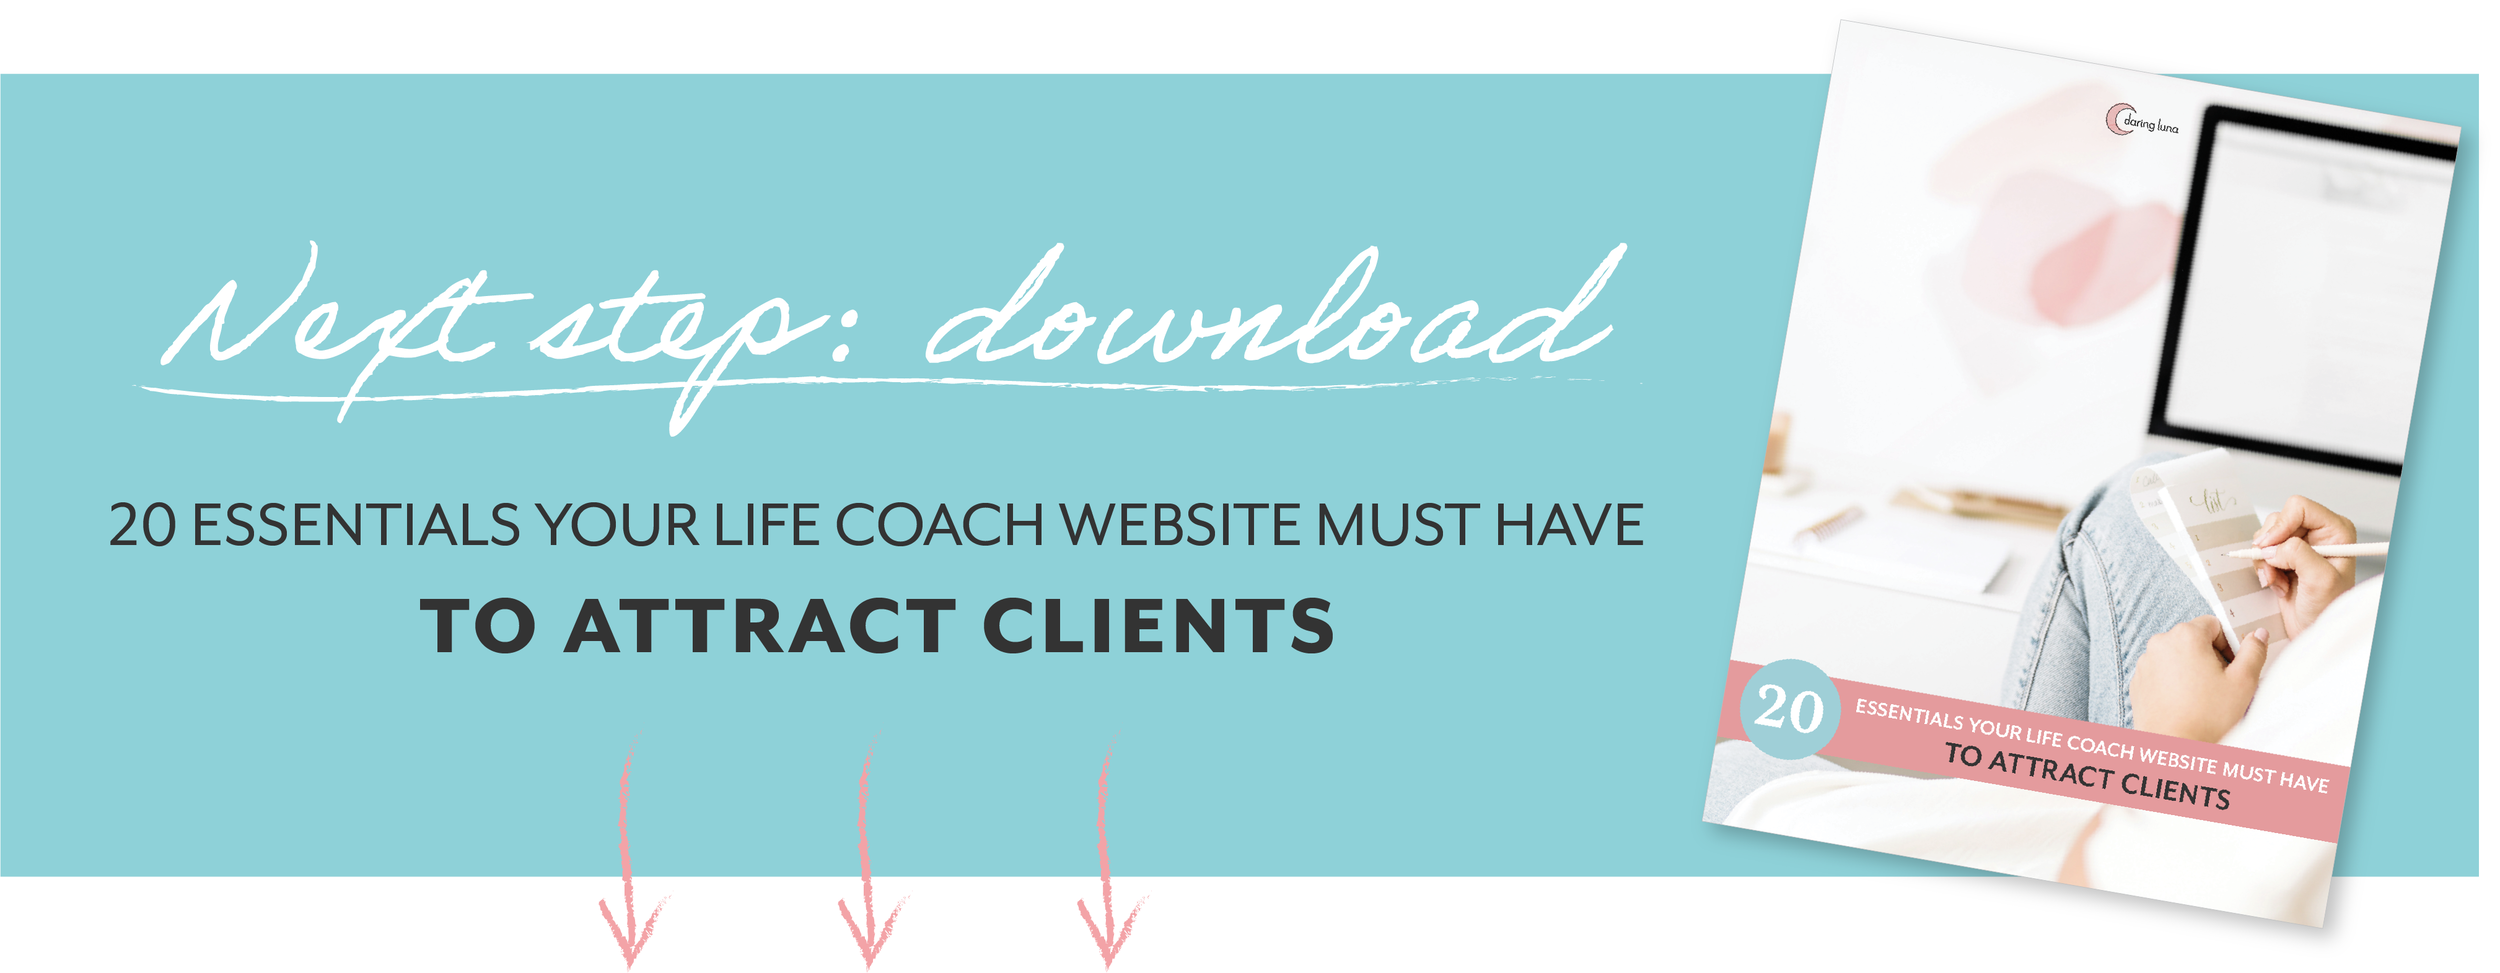 10 Best Life Coach Websites (and why they work!) | Web Design ...